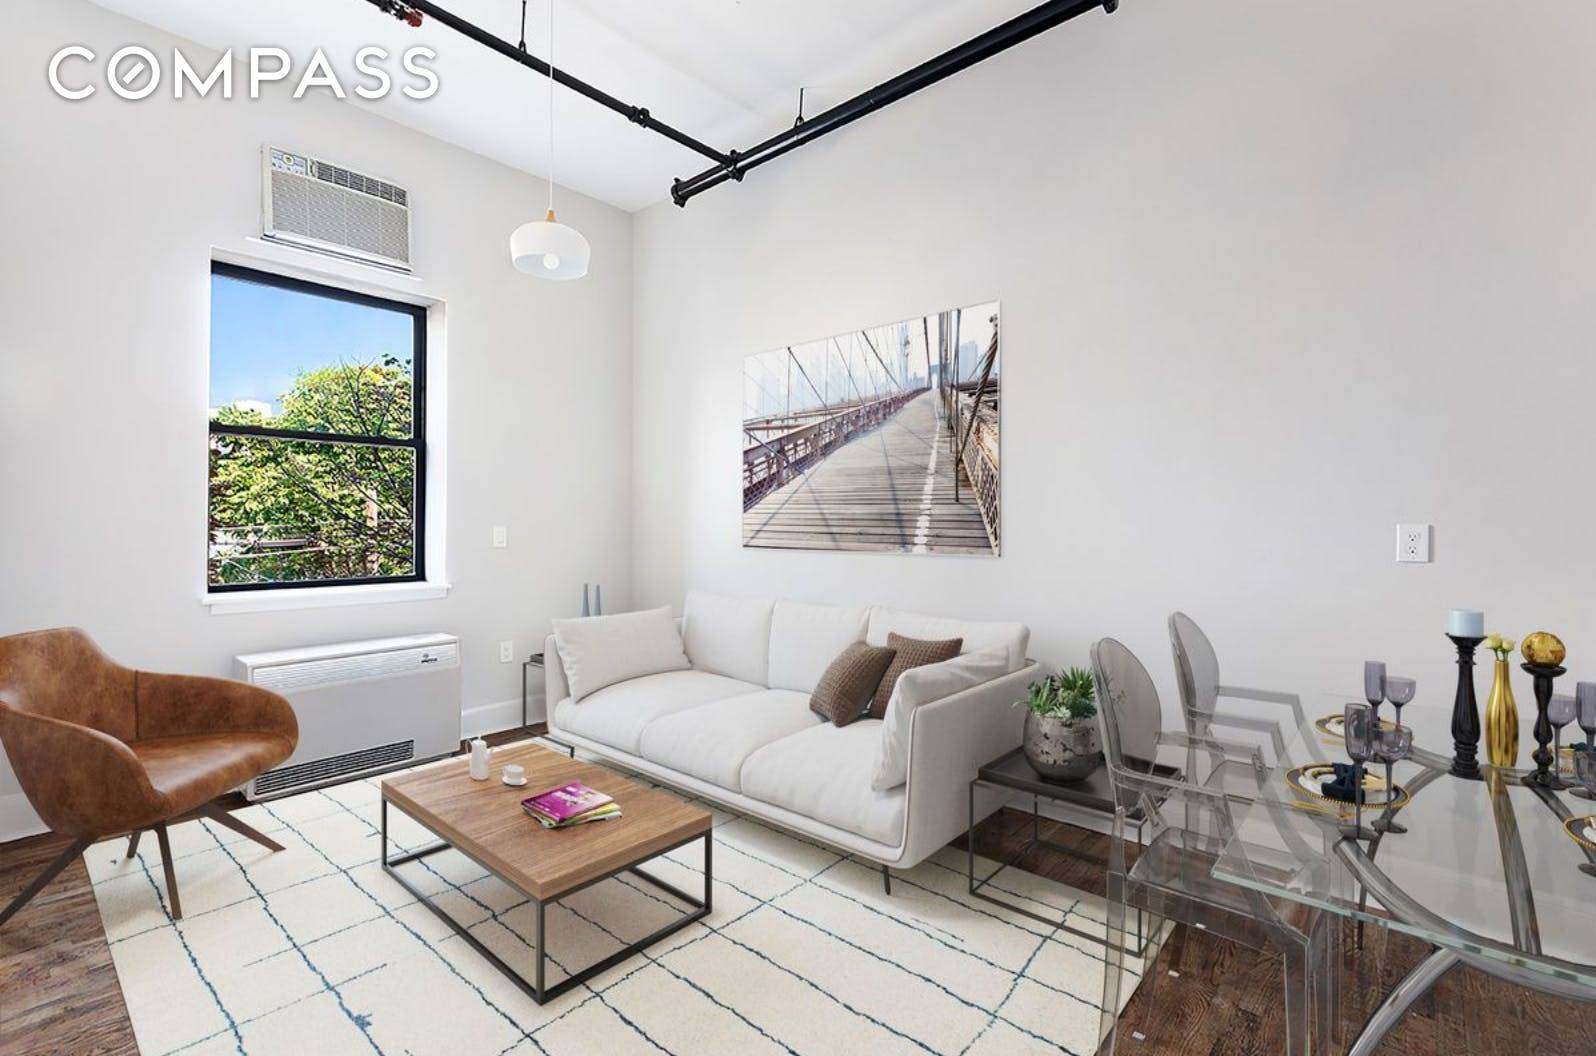 Williamsburg Loft Like, Renovated 1BD with Updated Kitchen with Stainless Steel Appliances, D W, M W, High Ceilings in a Pet Friendly Elevator Building with Laundry Room An amazing one ...